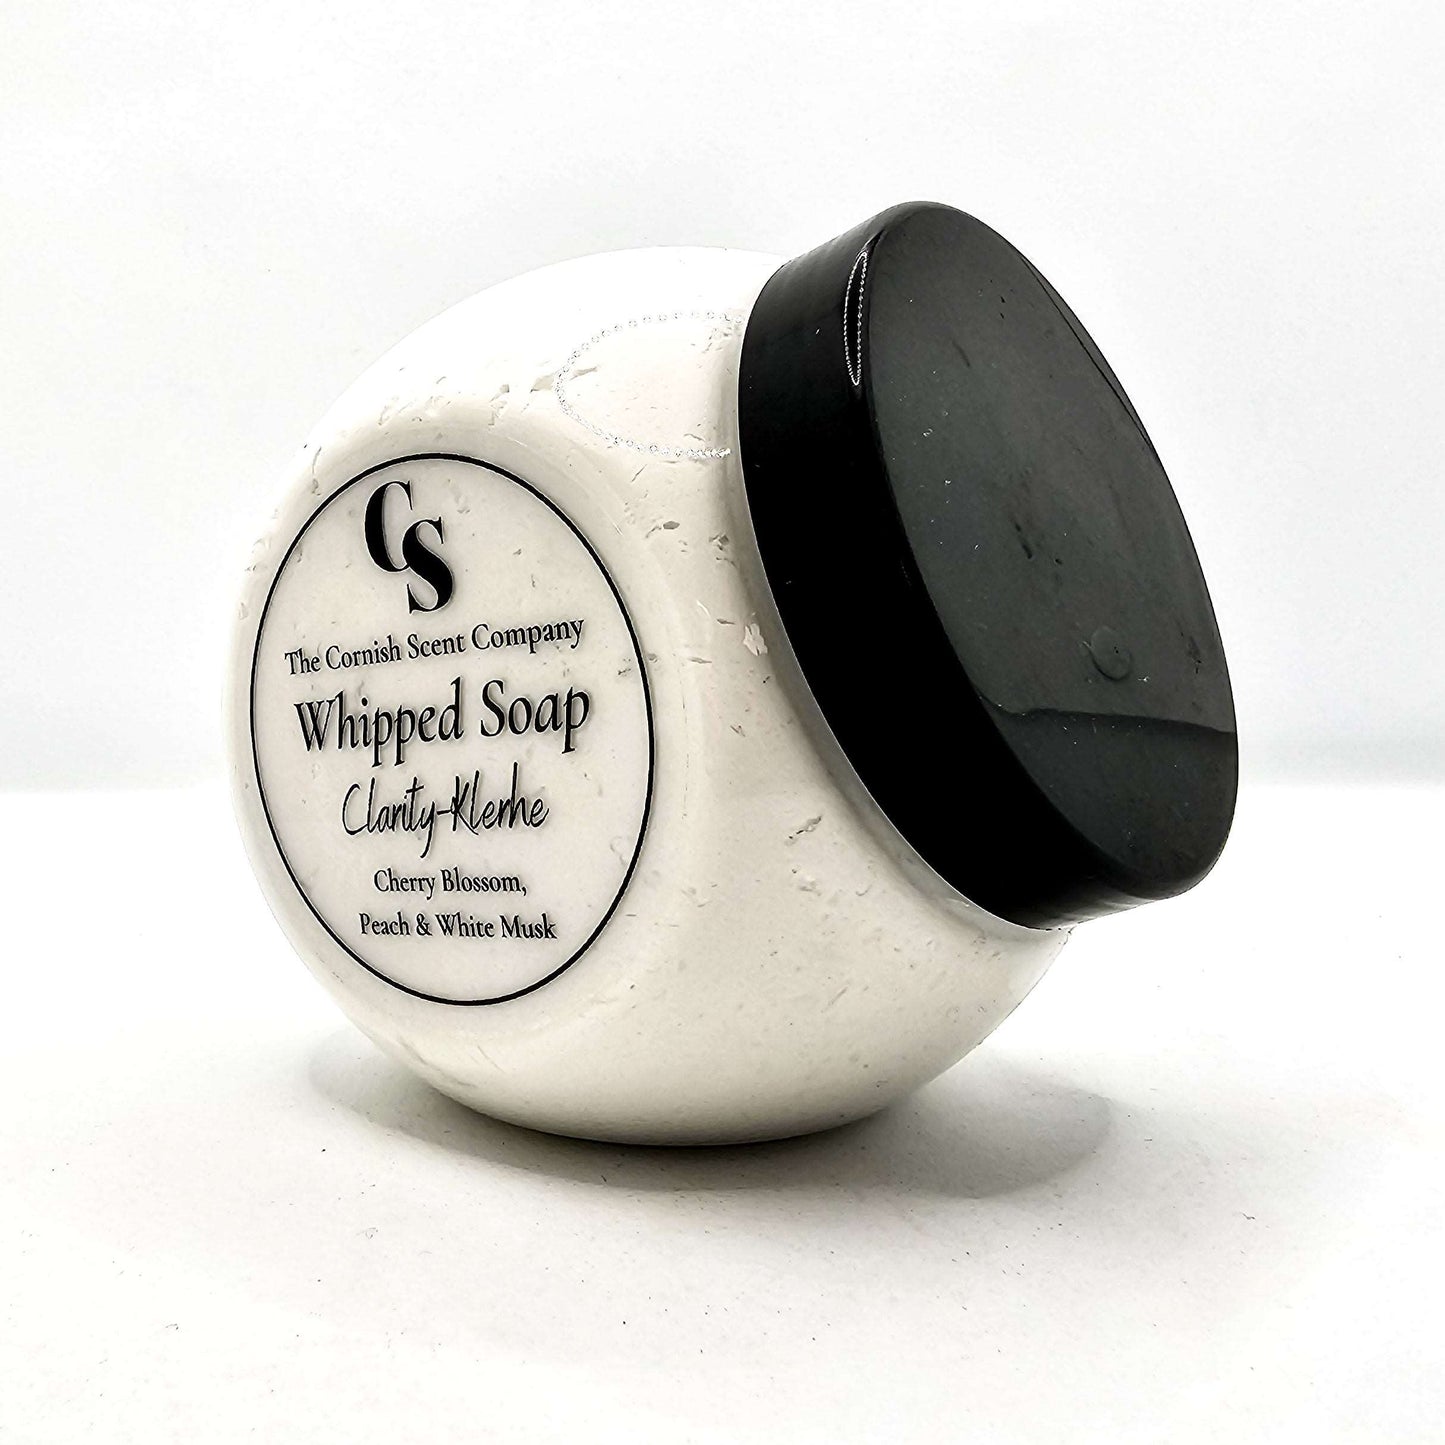 Whipped soap / bath mouse